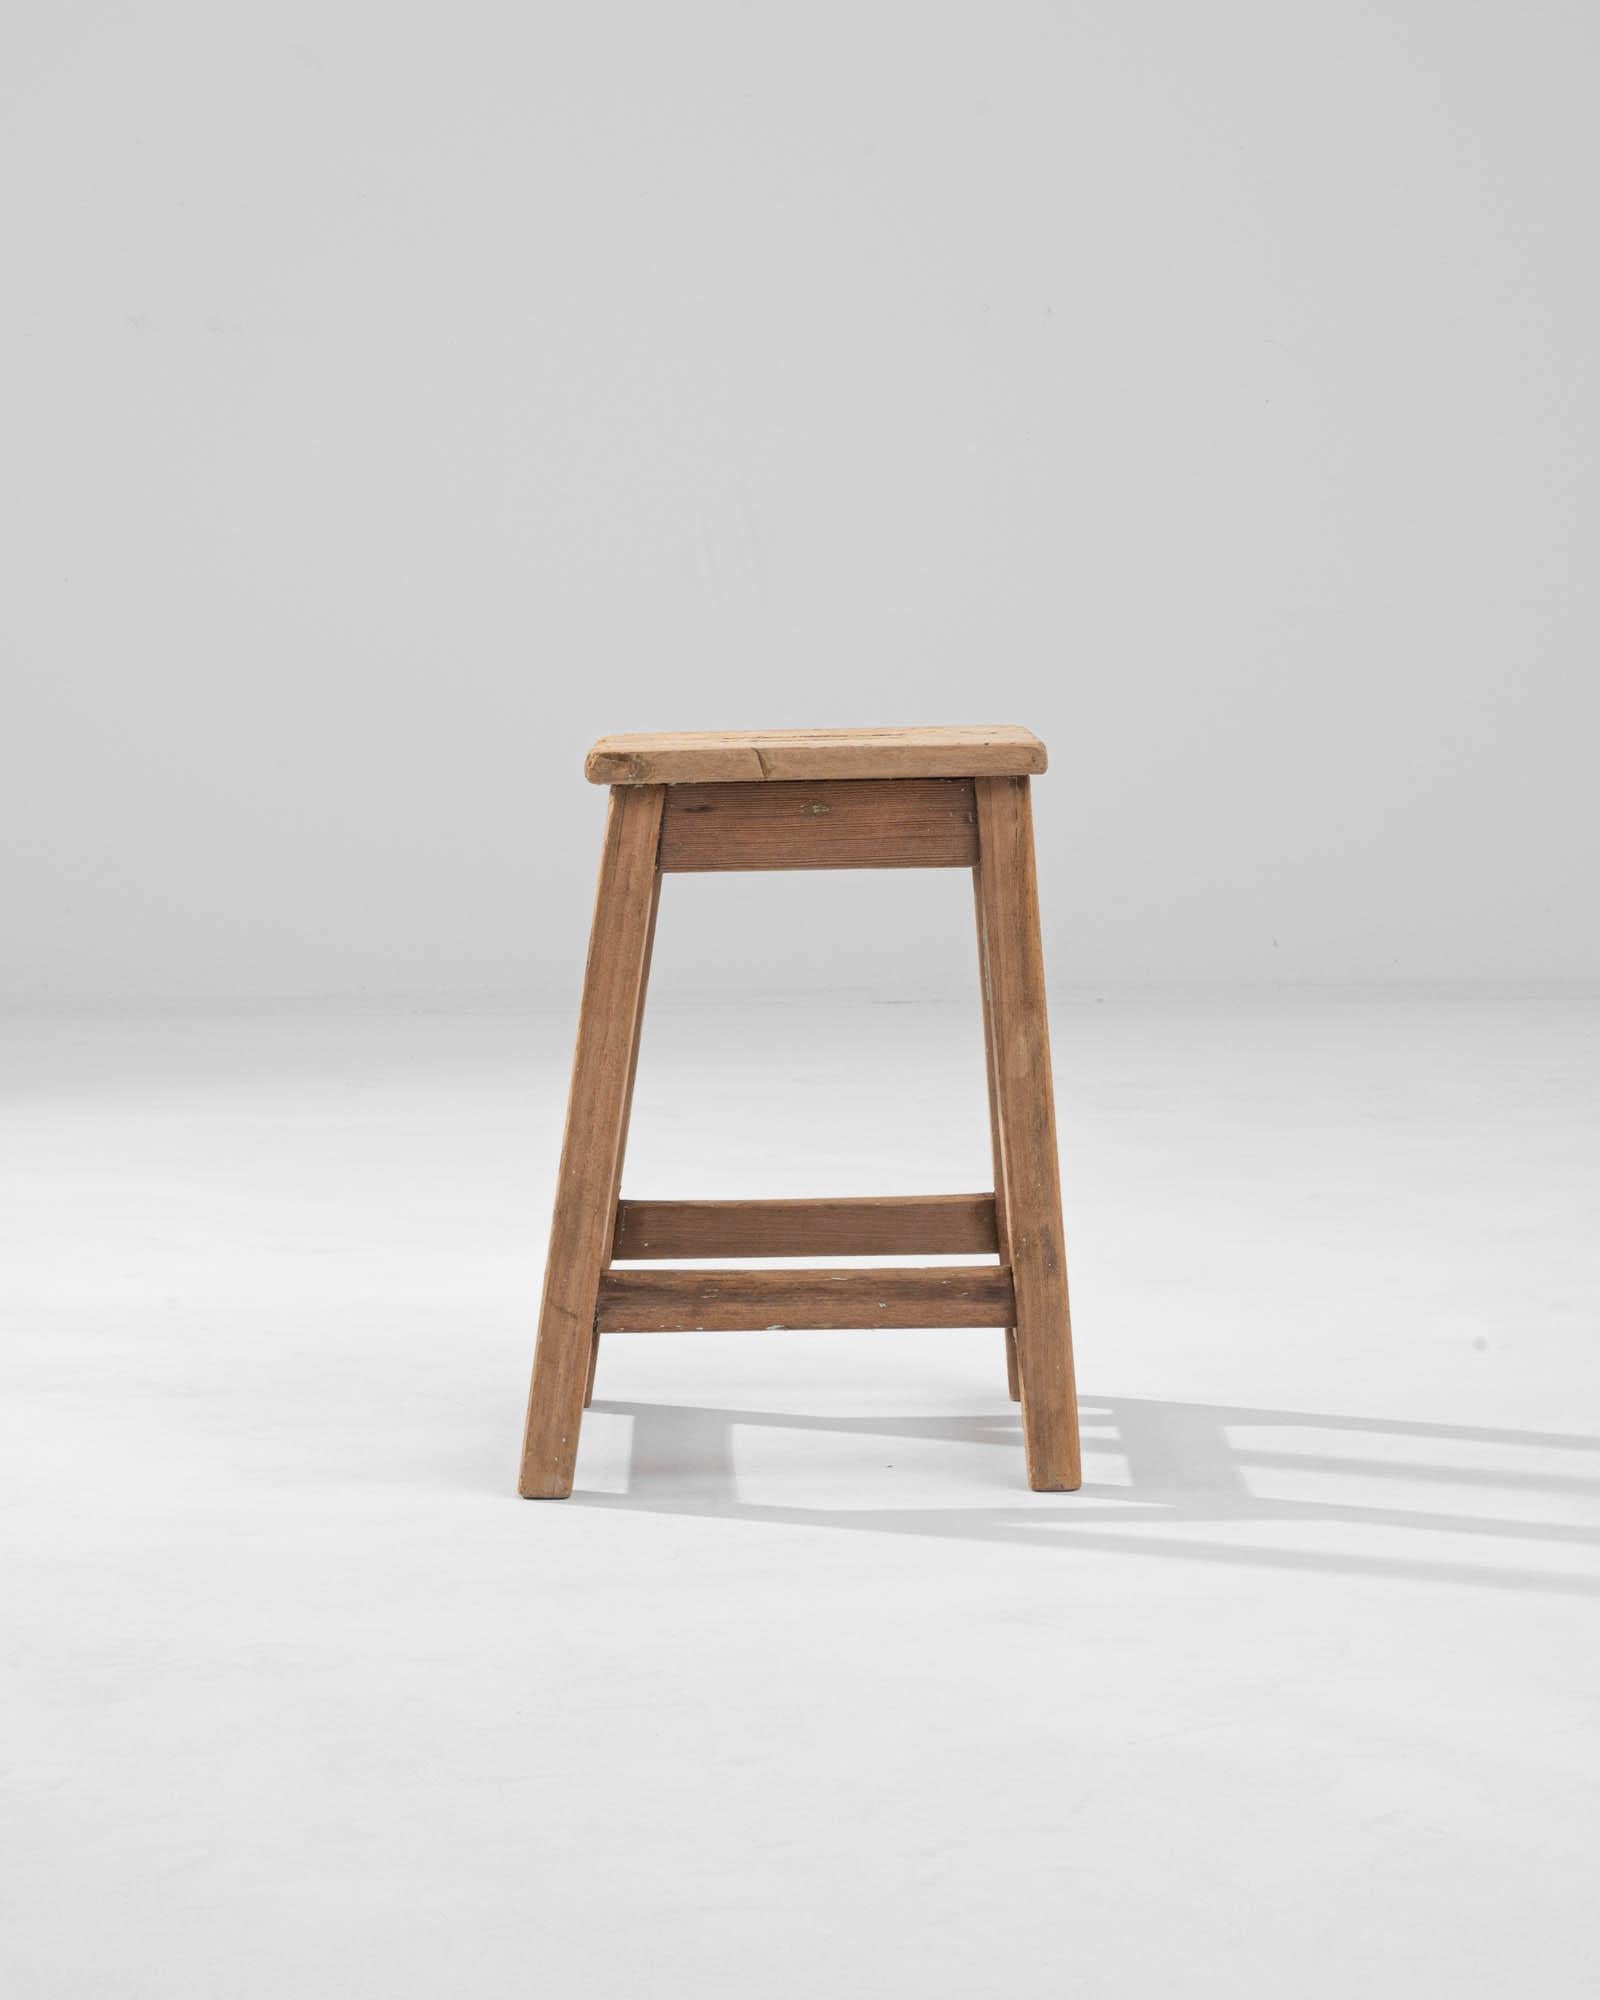 Introducing a piece that's as much a charming slice of history as it is a practical seating option – the Early 20th Century French Wooden Stool. Crafted from solid wood, this stool exhibits the warmth and resilience of a bygone era with its